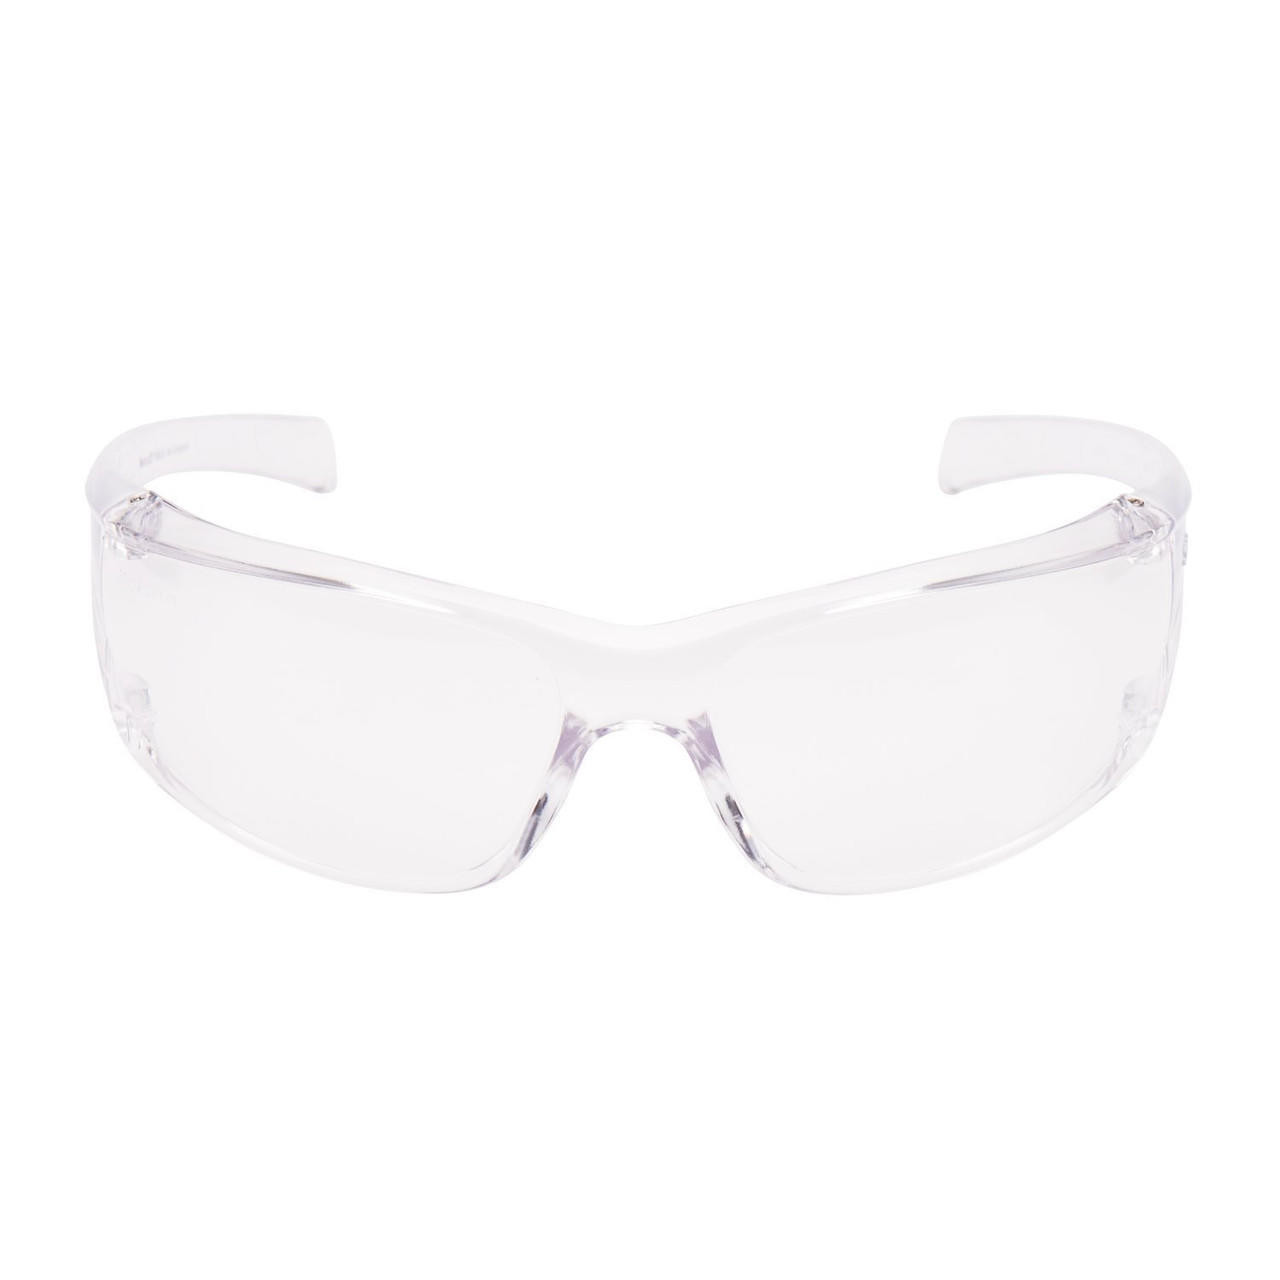  Bulk pack of 240 Pairs of Safety Glasses Clear Lens Trade Wholesale 